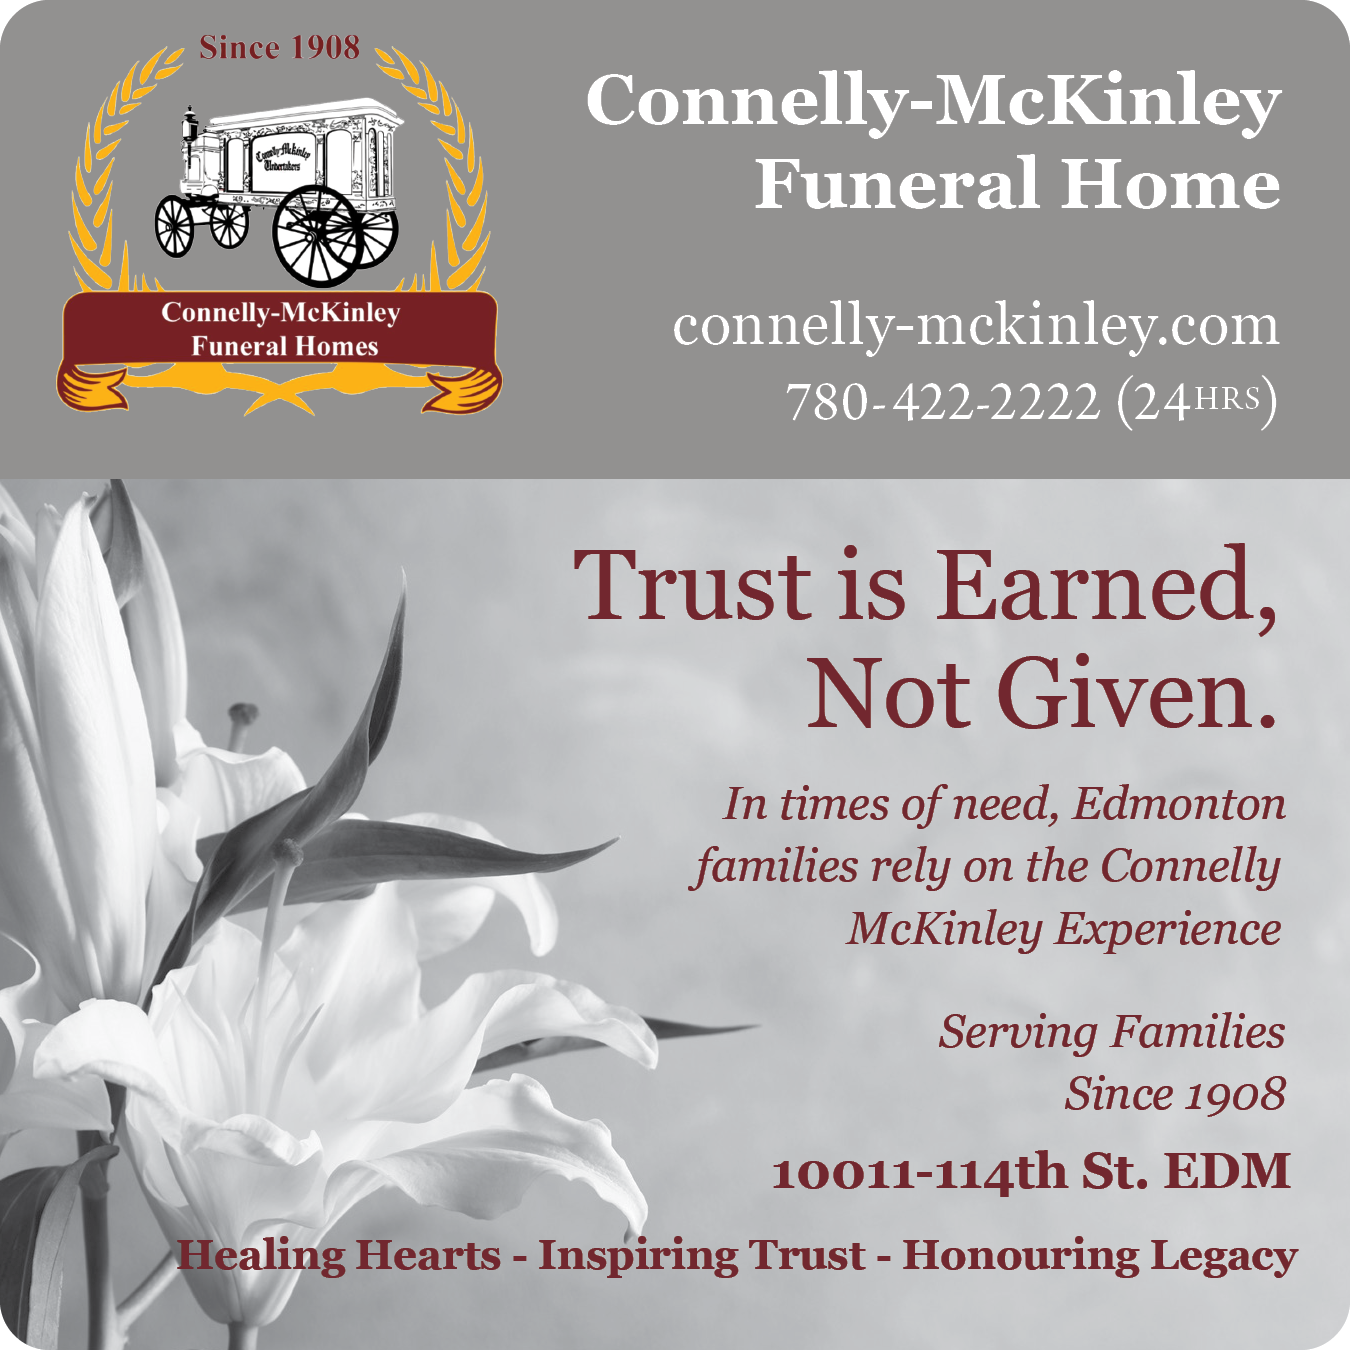 Connelly-Mckinley Funeral Homes